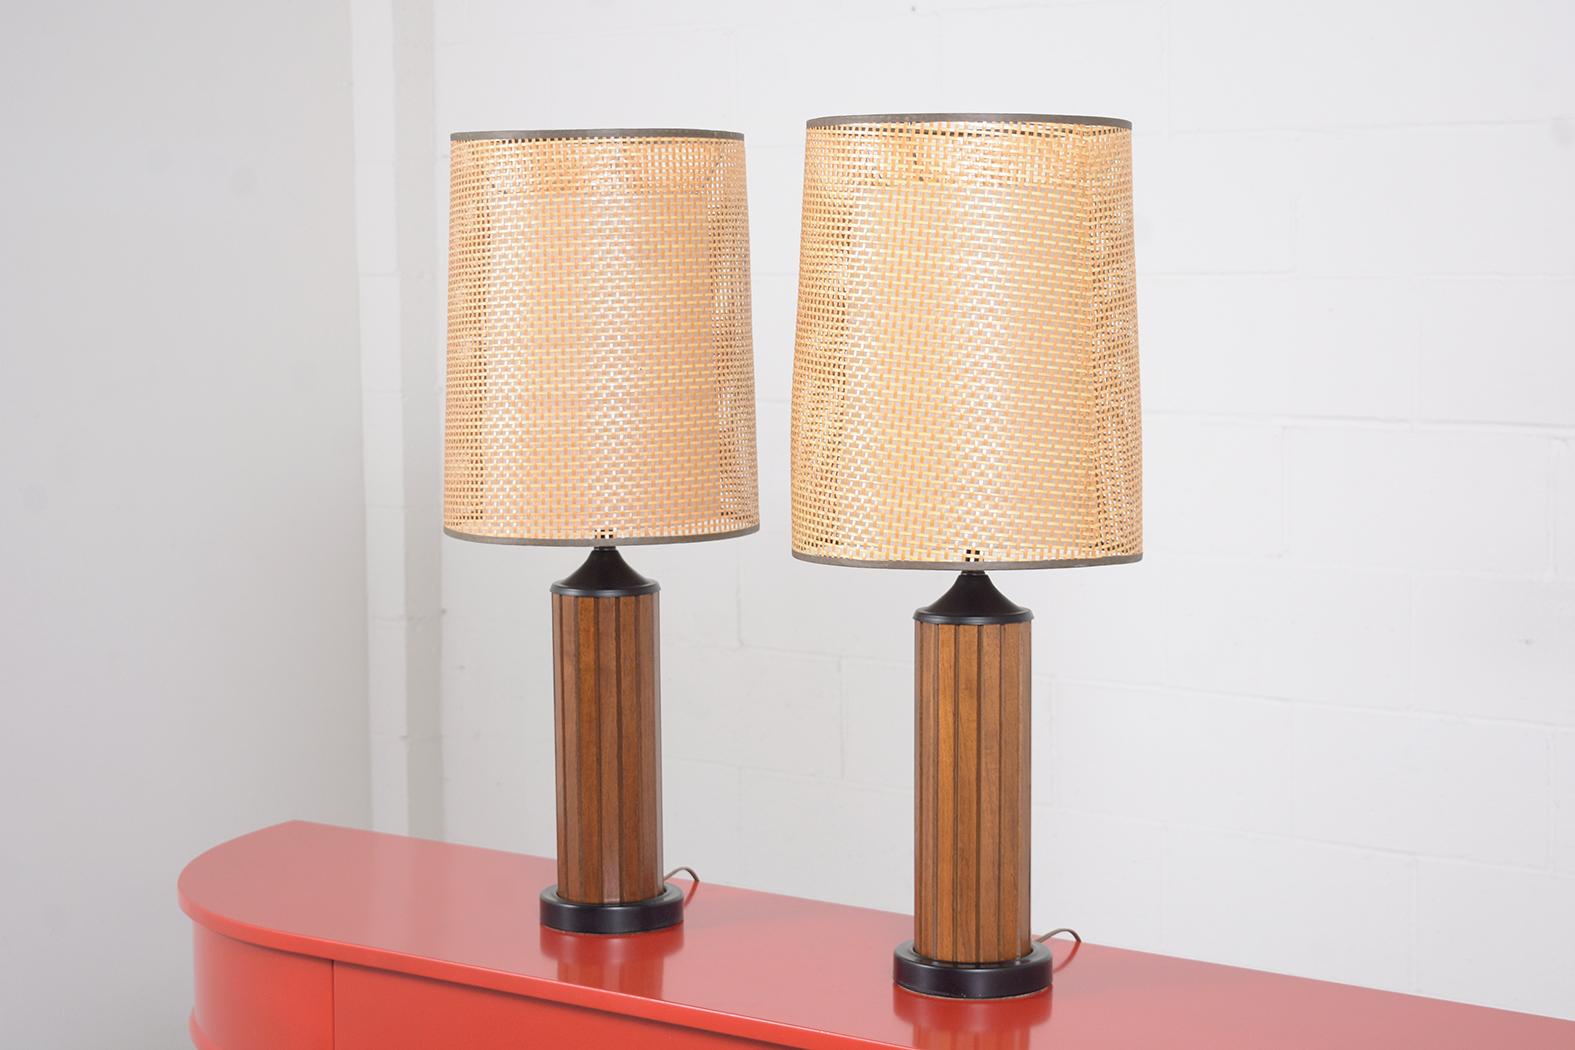 vintage table lamps 1960s